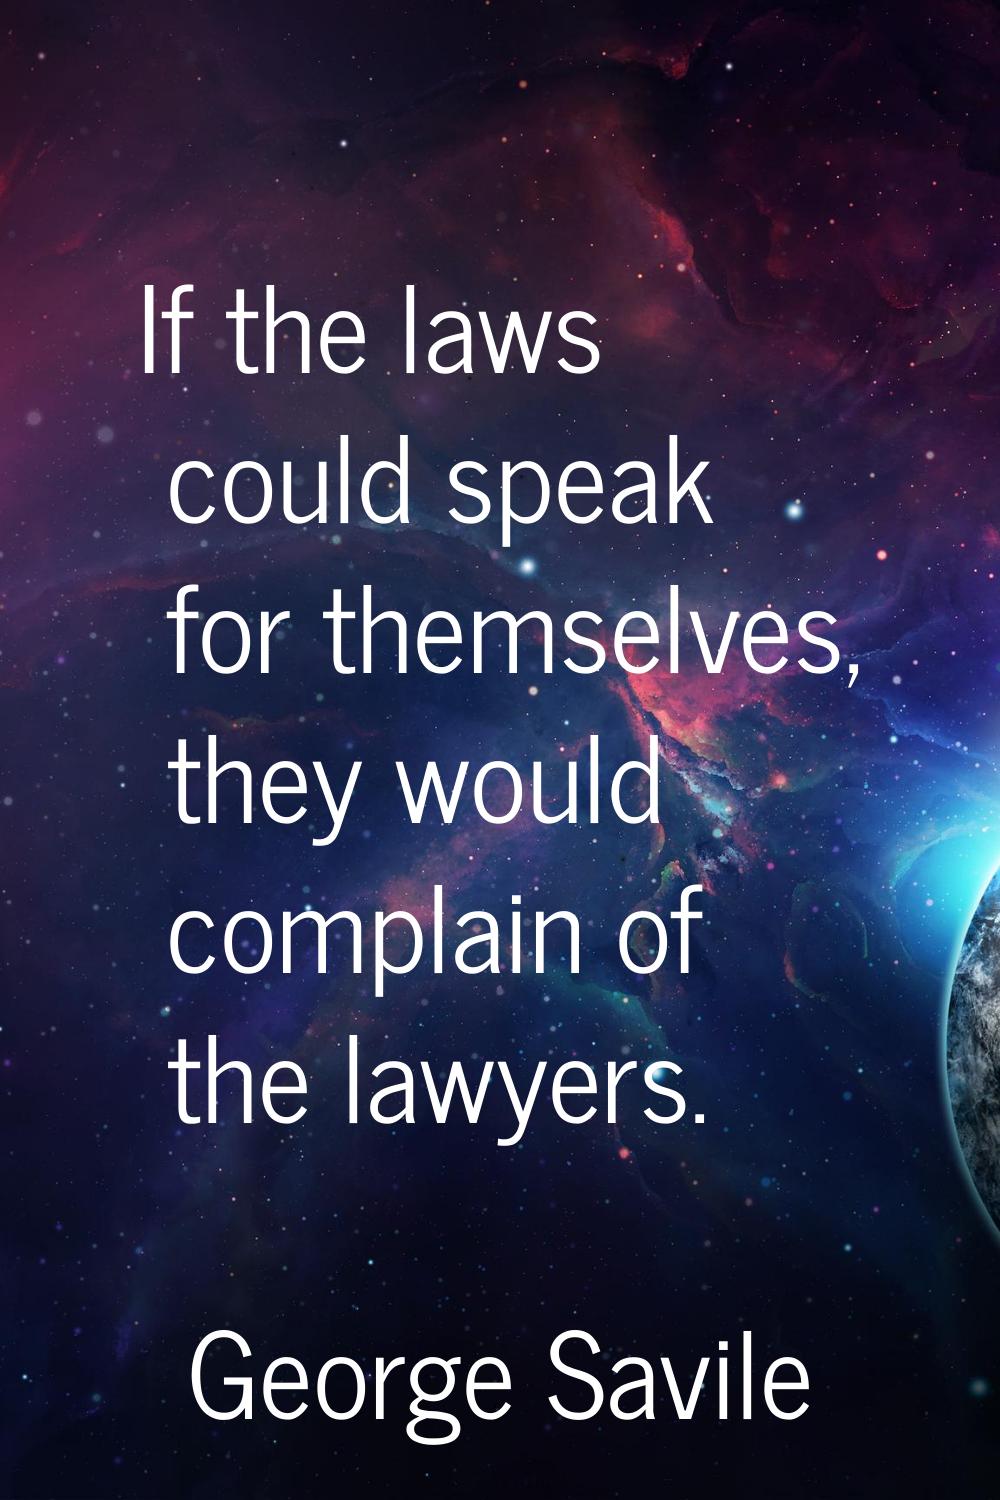 If the laws could speak for themselves, they would complain of the lawyers.